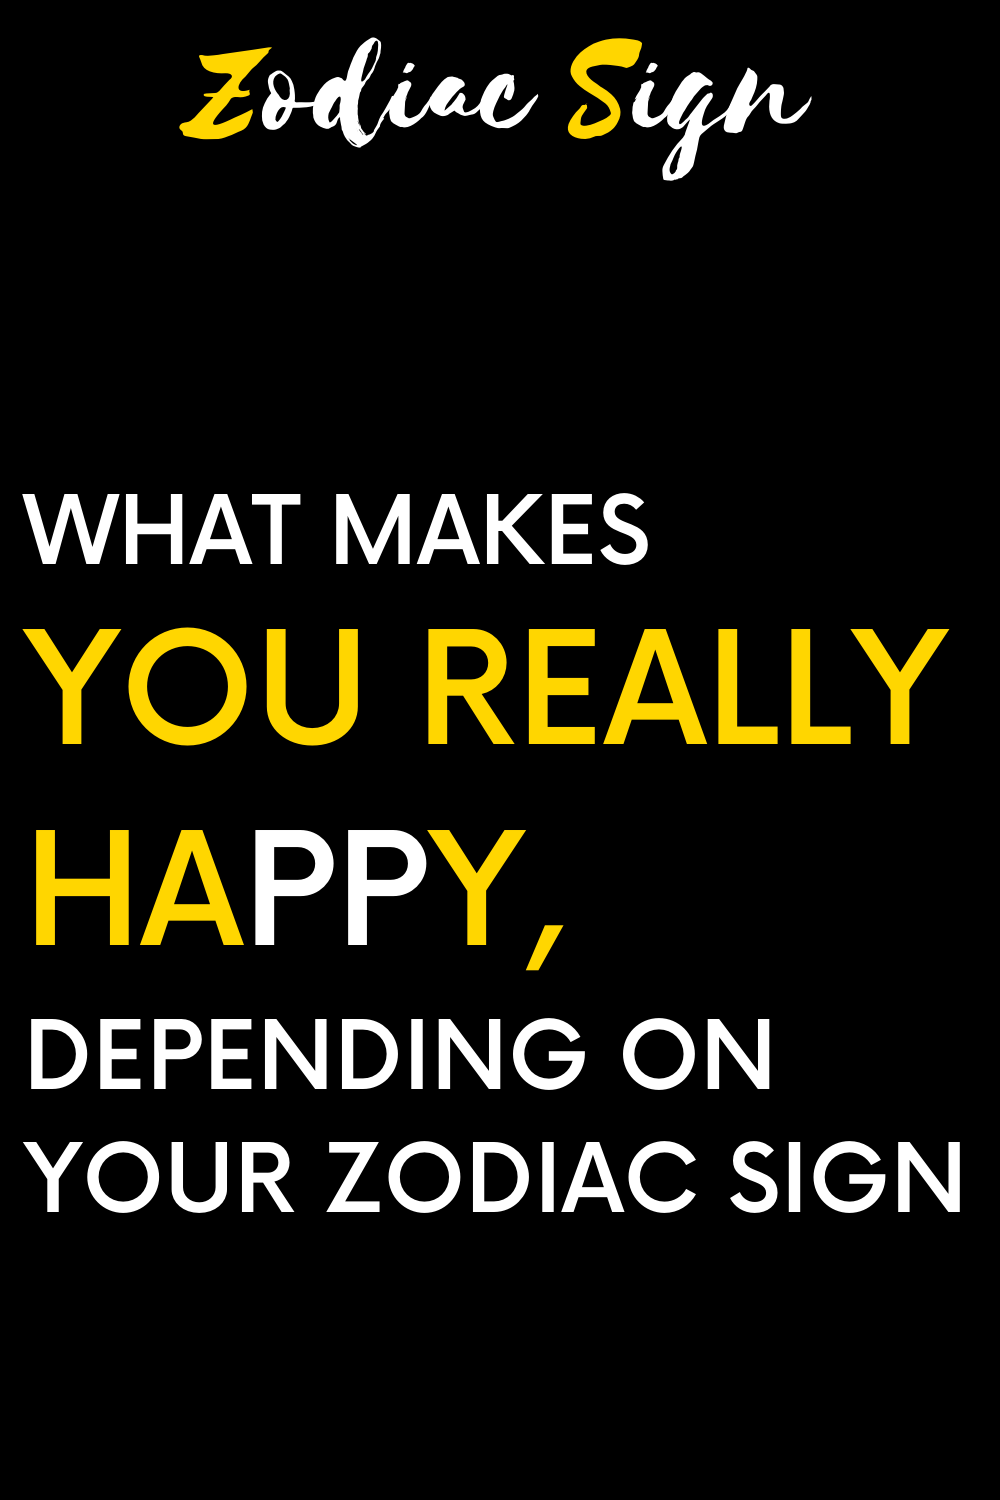 What makes you really happy, depending on your zodiac sign